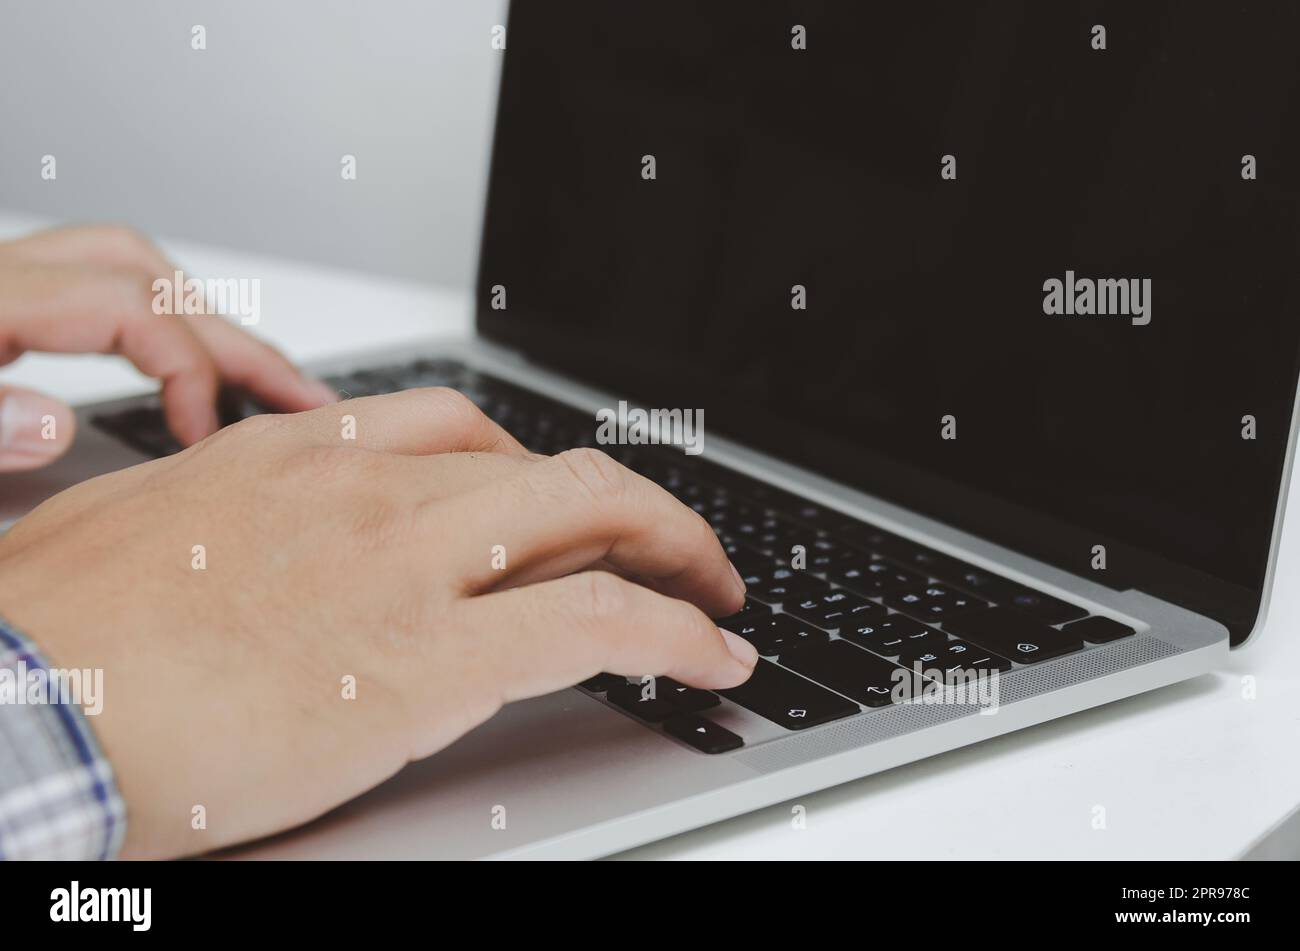 Hand man using keyboard computer laptop digital internet technology network browsing and shopping online and social media. Stock Photo